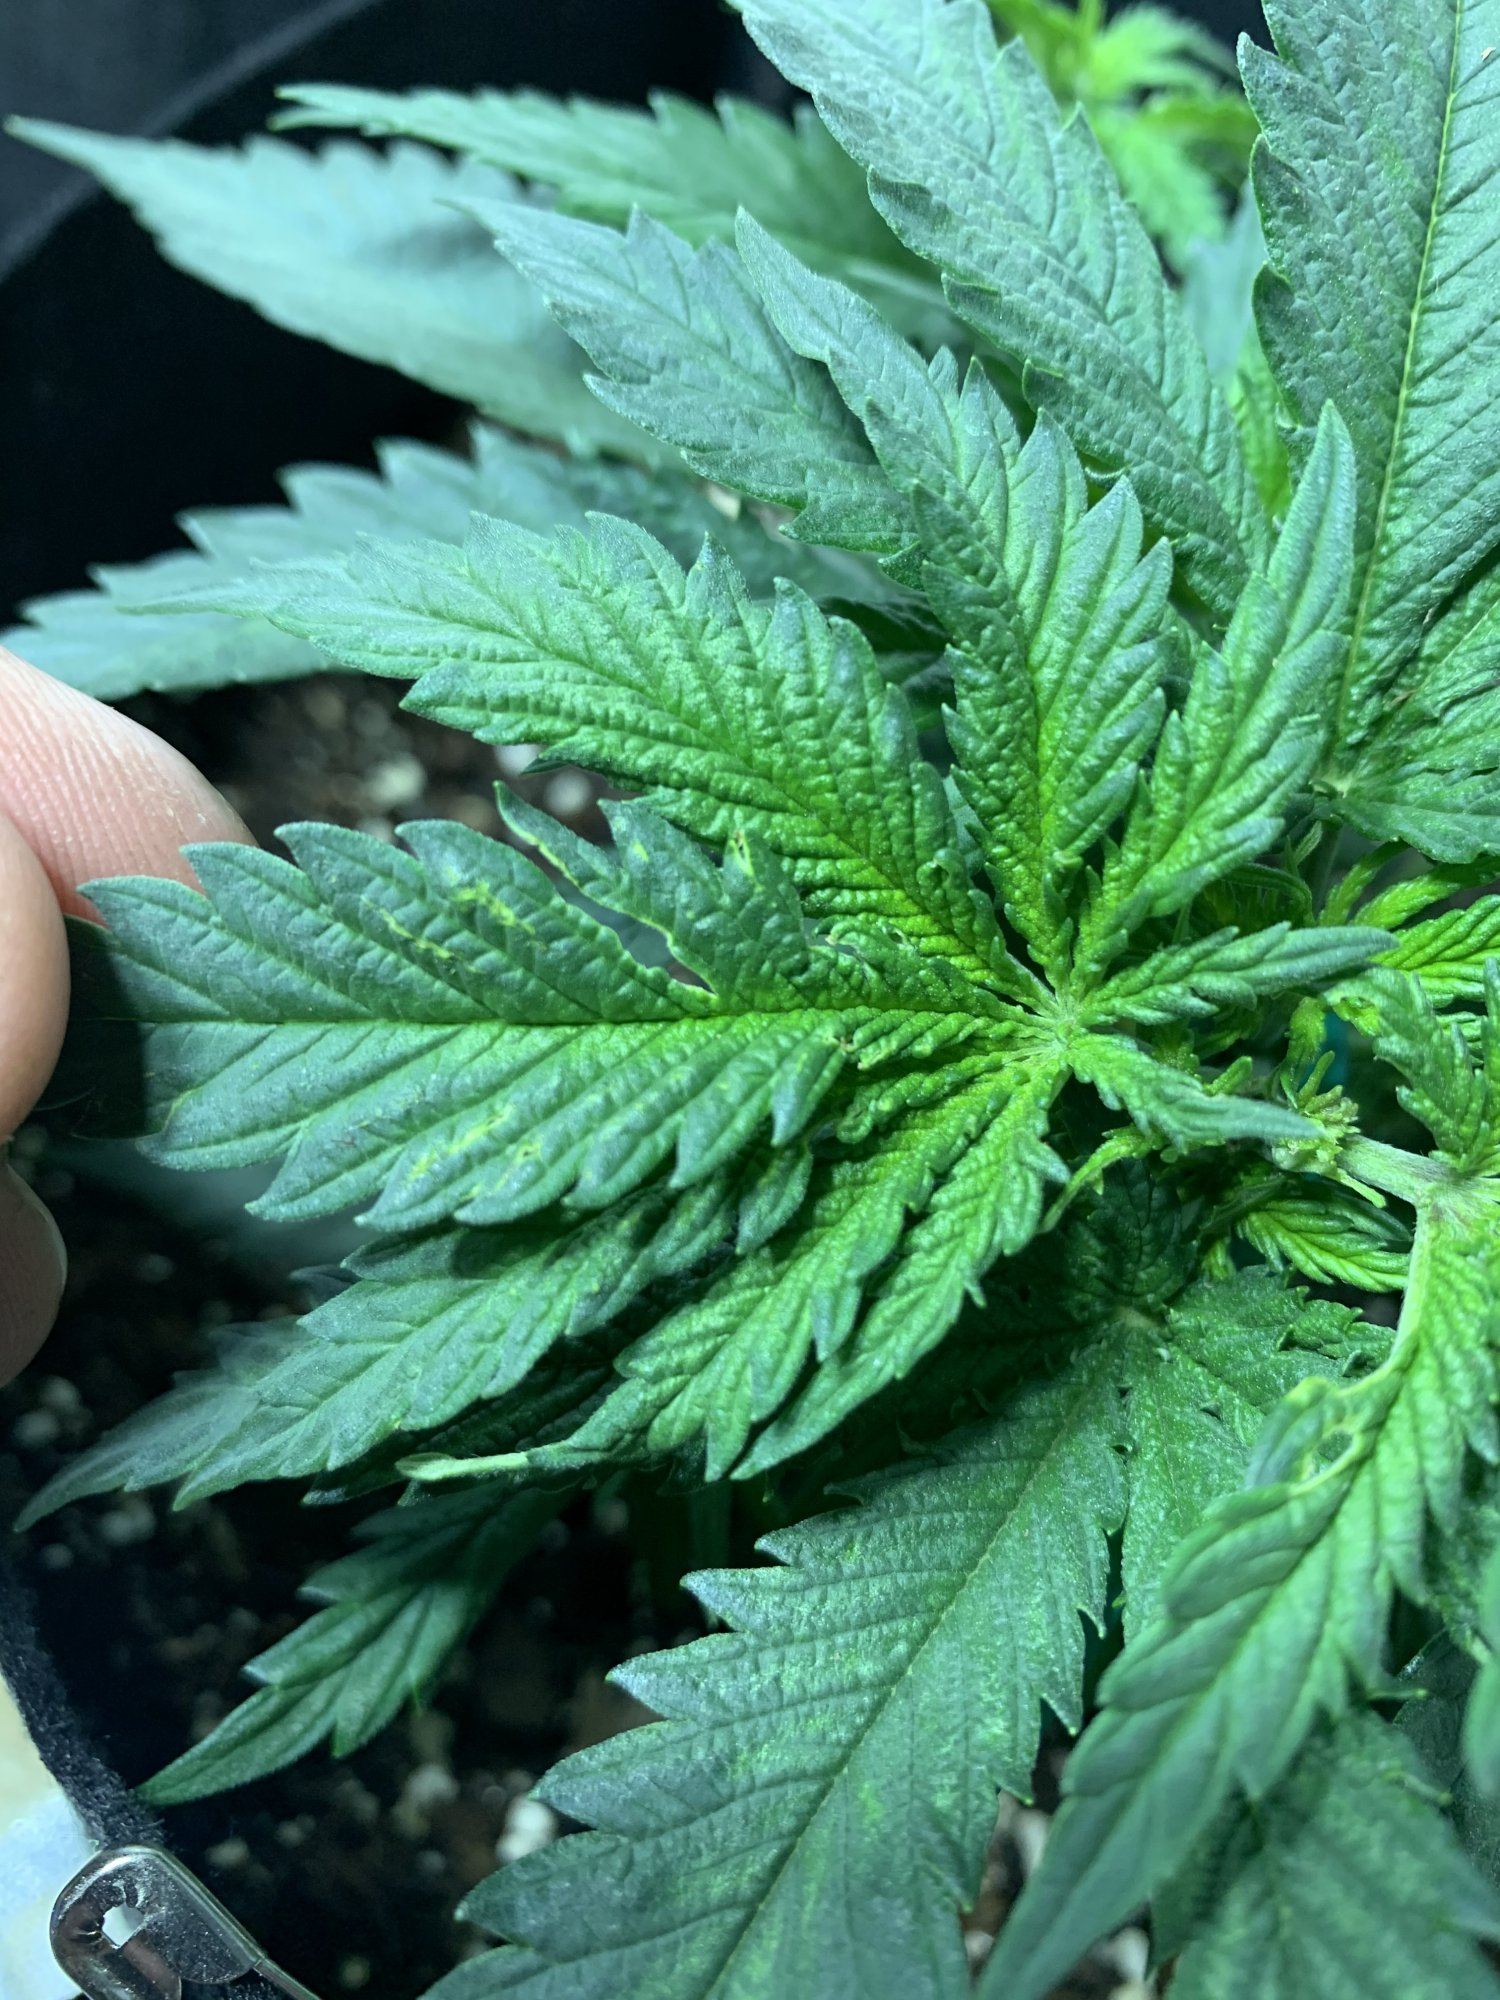 Please help what is happening to my girls